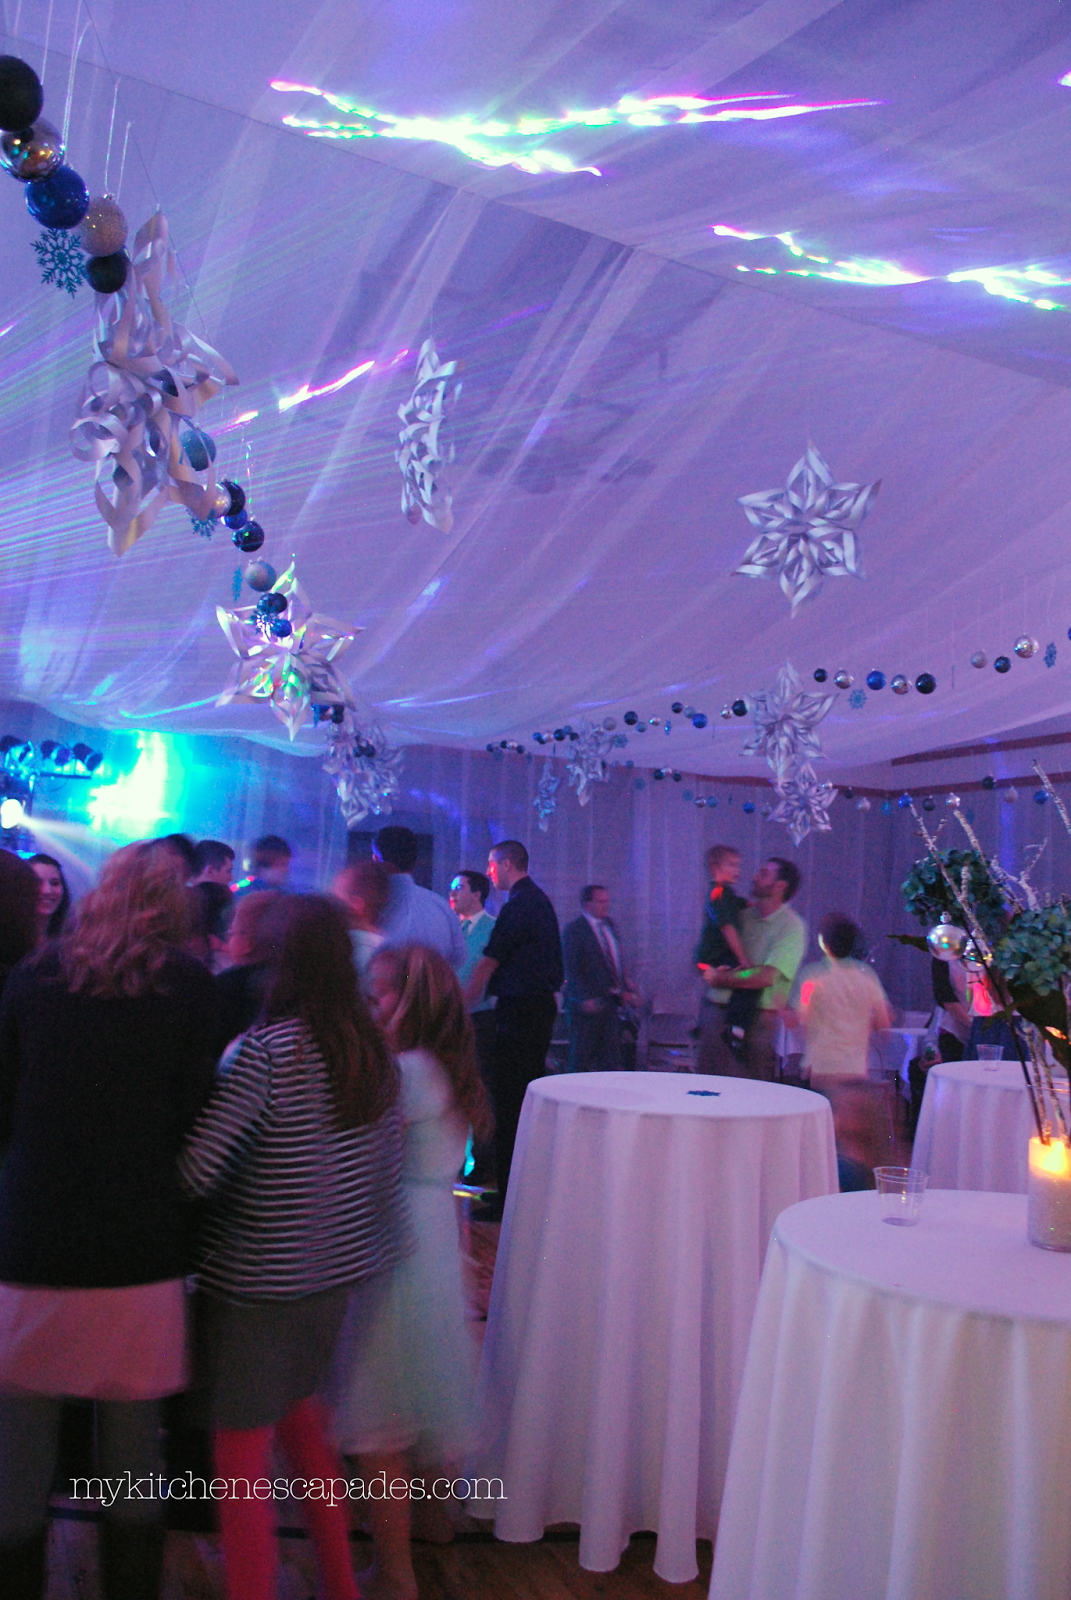 How to drape material for a wedding ceiling